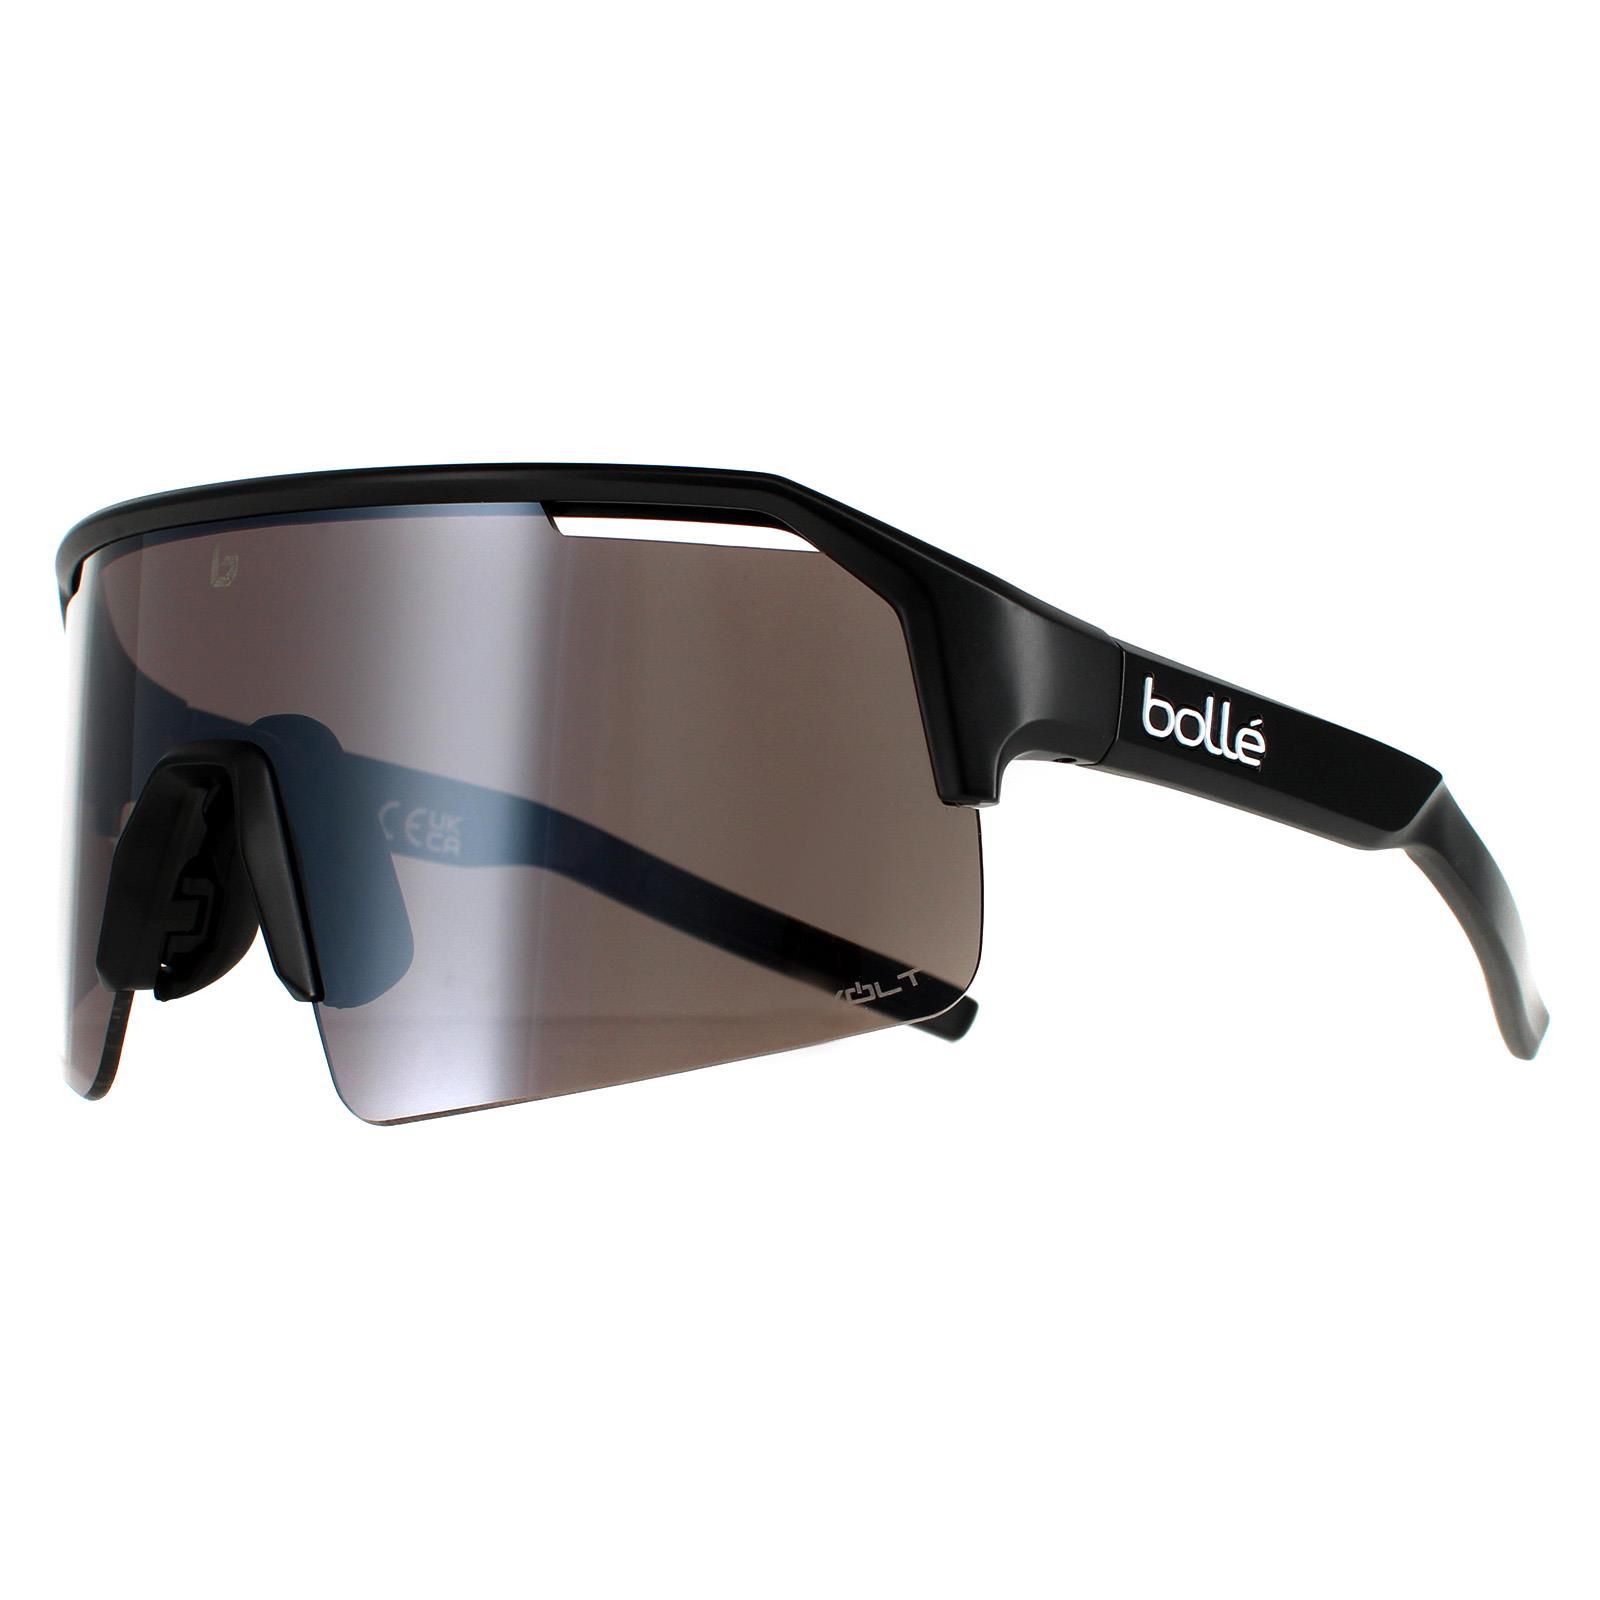 Bolle Shield Unisex Matte Black Volt Gun C-Shifter  Bolle are from the Bolle performance collection designed for cycling but good for all sports. They have a large shield style lens with extra ventilation.